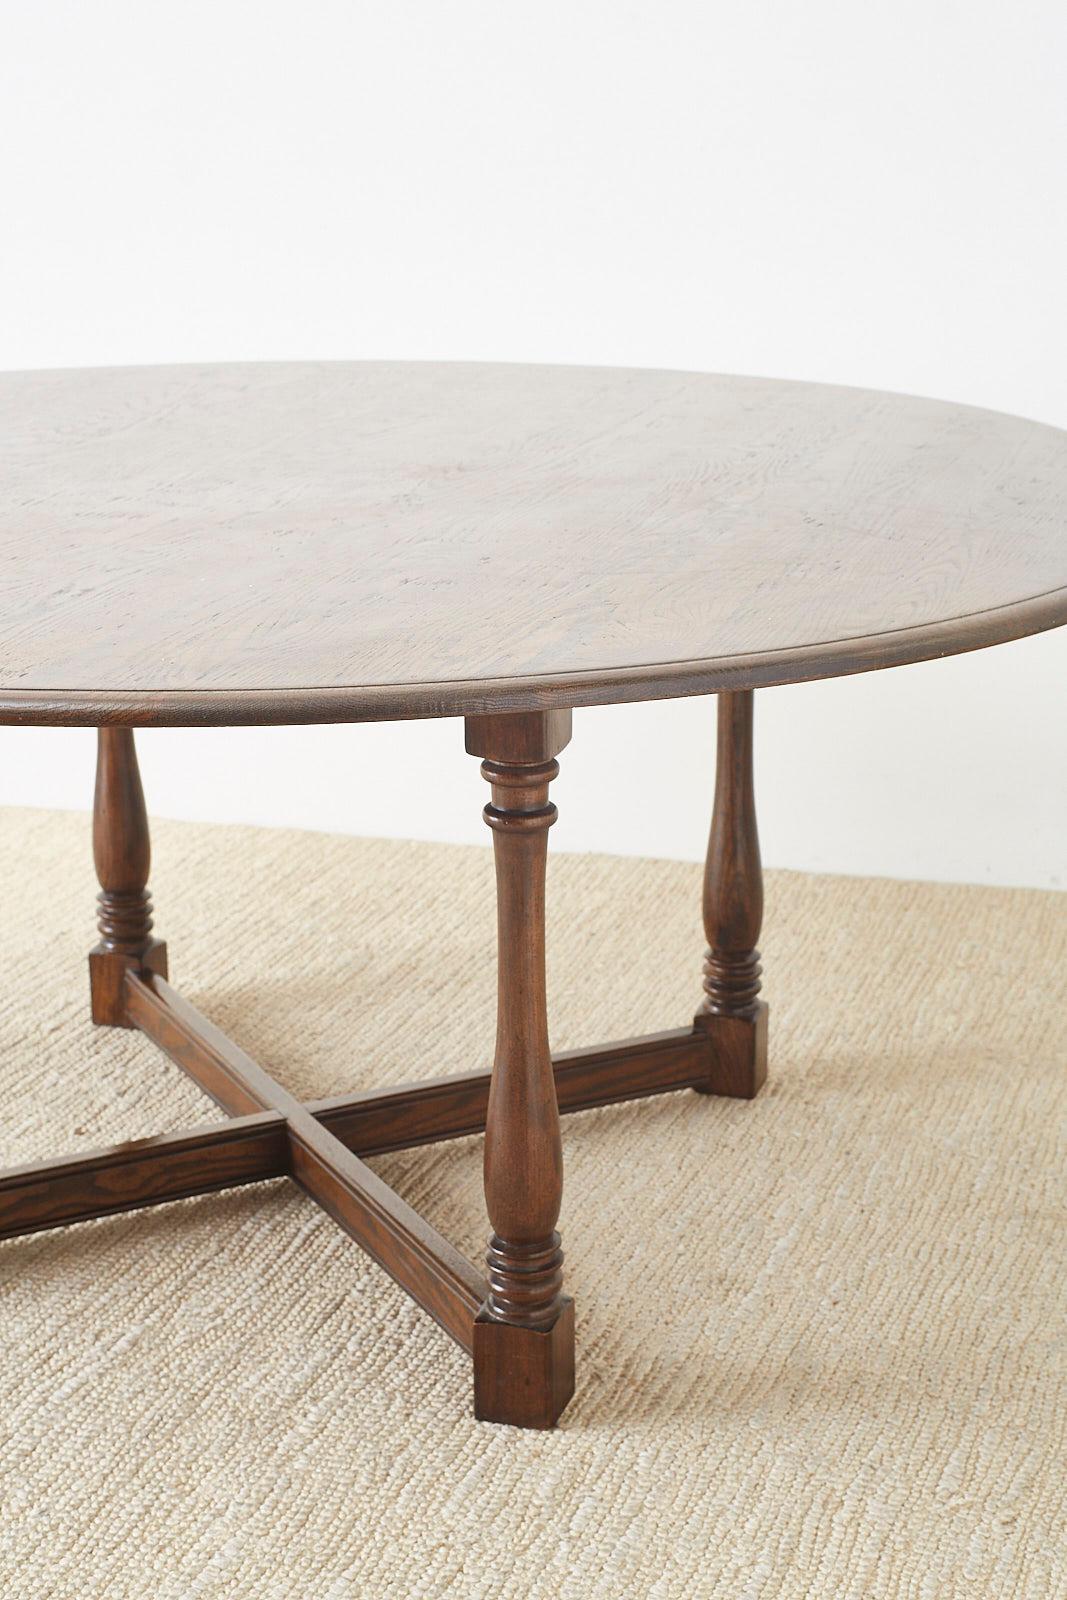 English Country Style Round Oak Dining Table 4